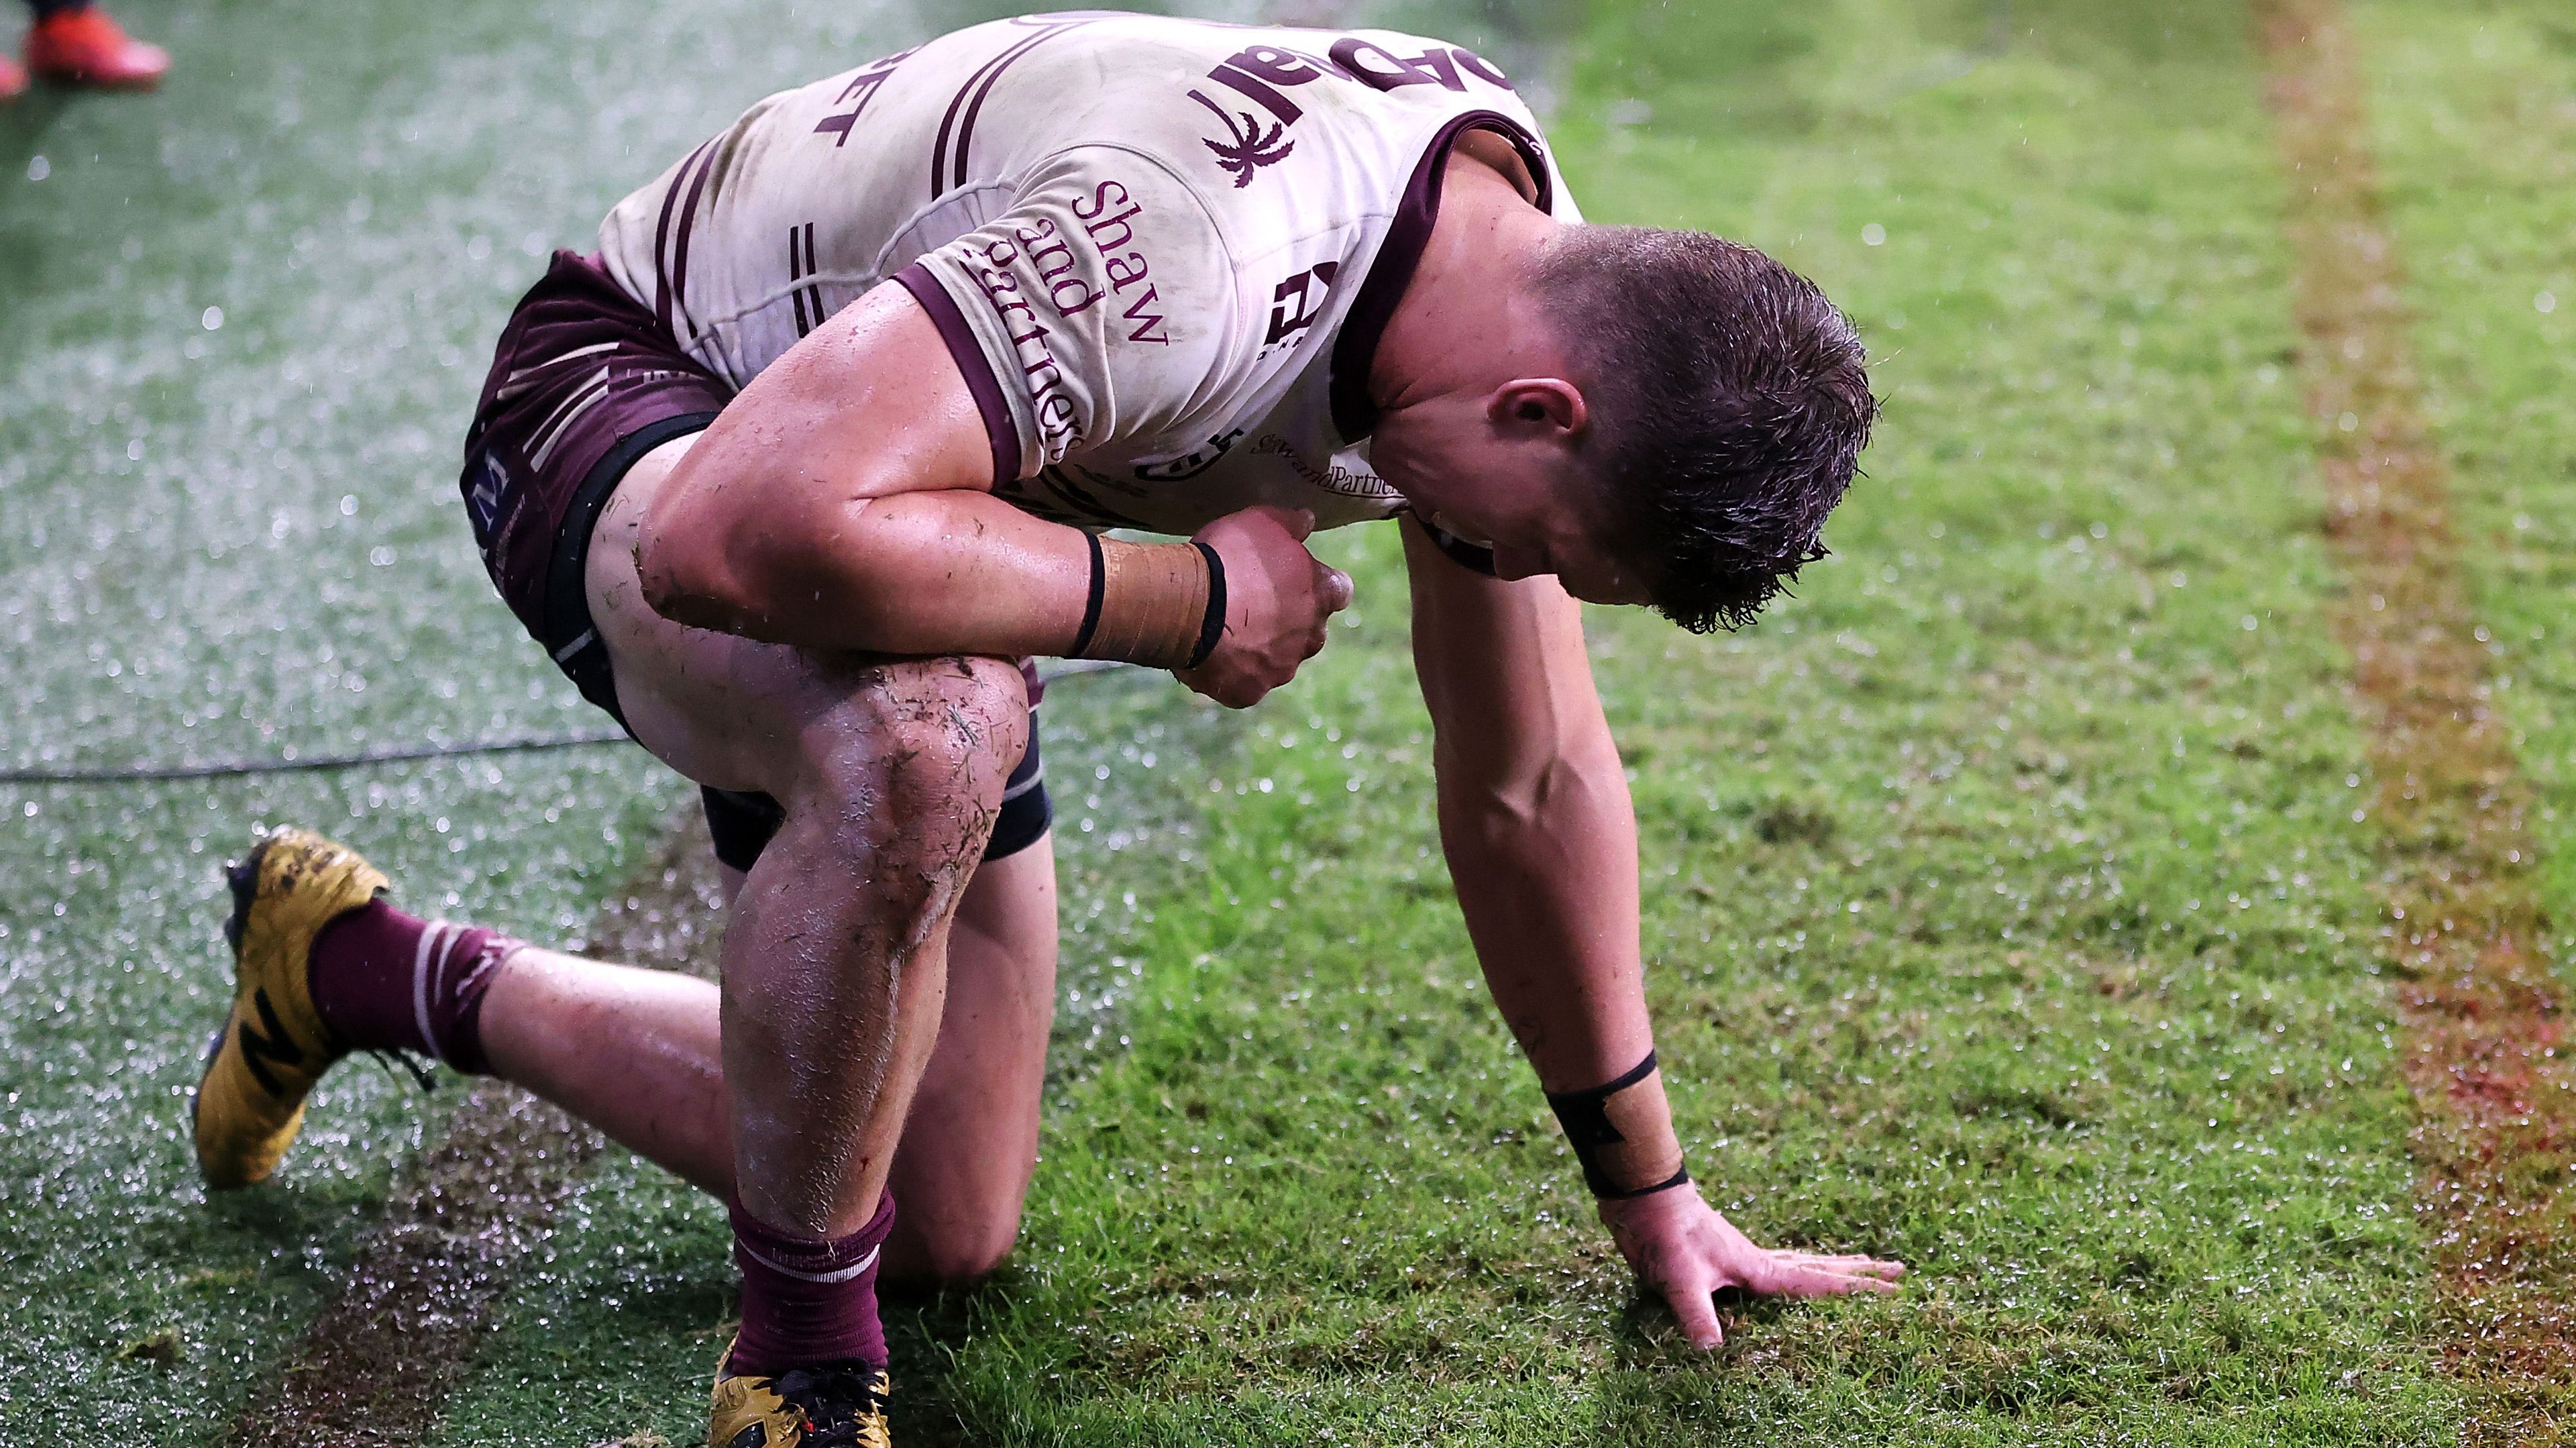 Reuben Garrick of the Sea Eagles looks dejected after conceding a try against the Eels.